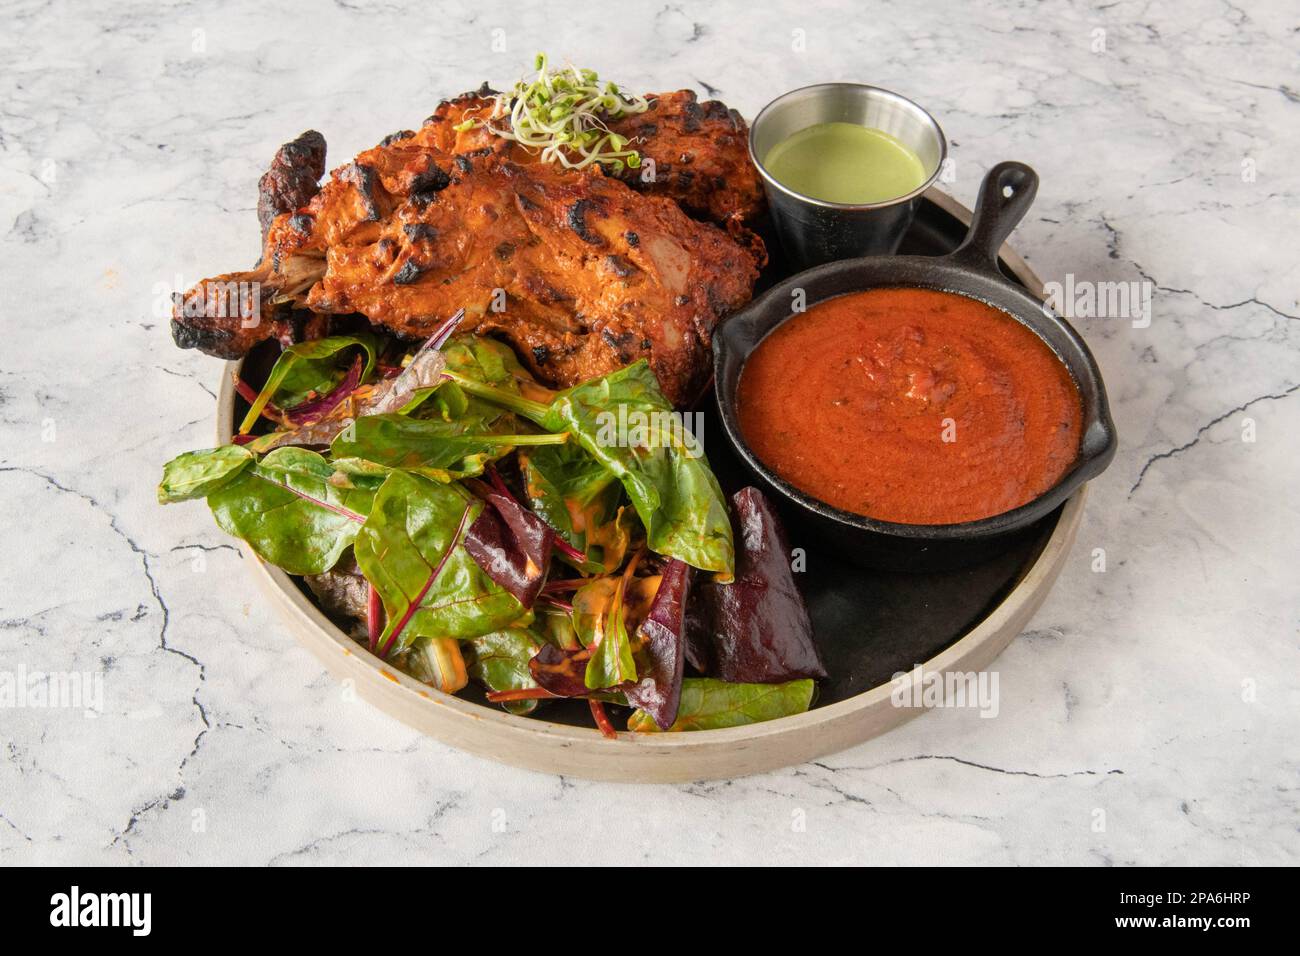 Selection of gourmet Indian cuisine Stock Photo